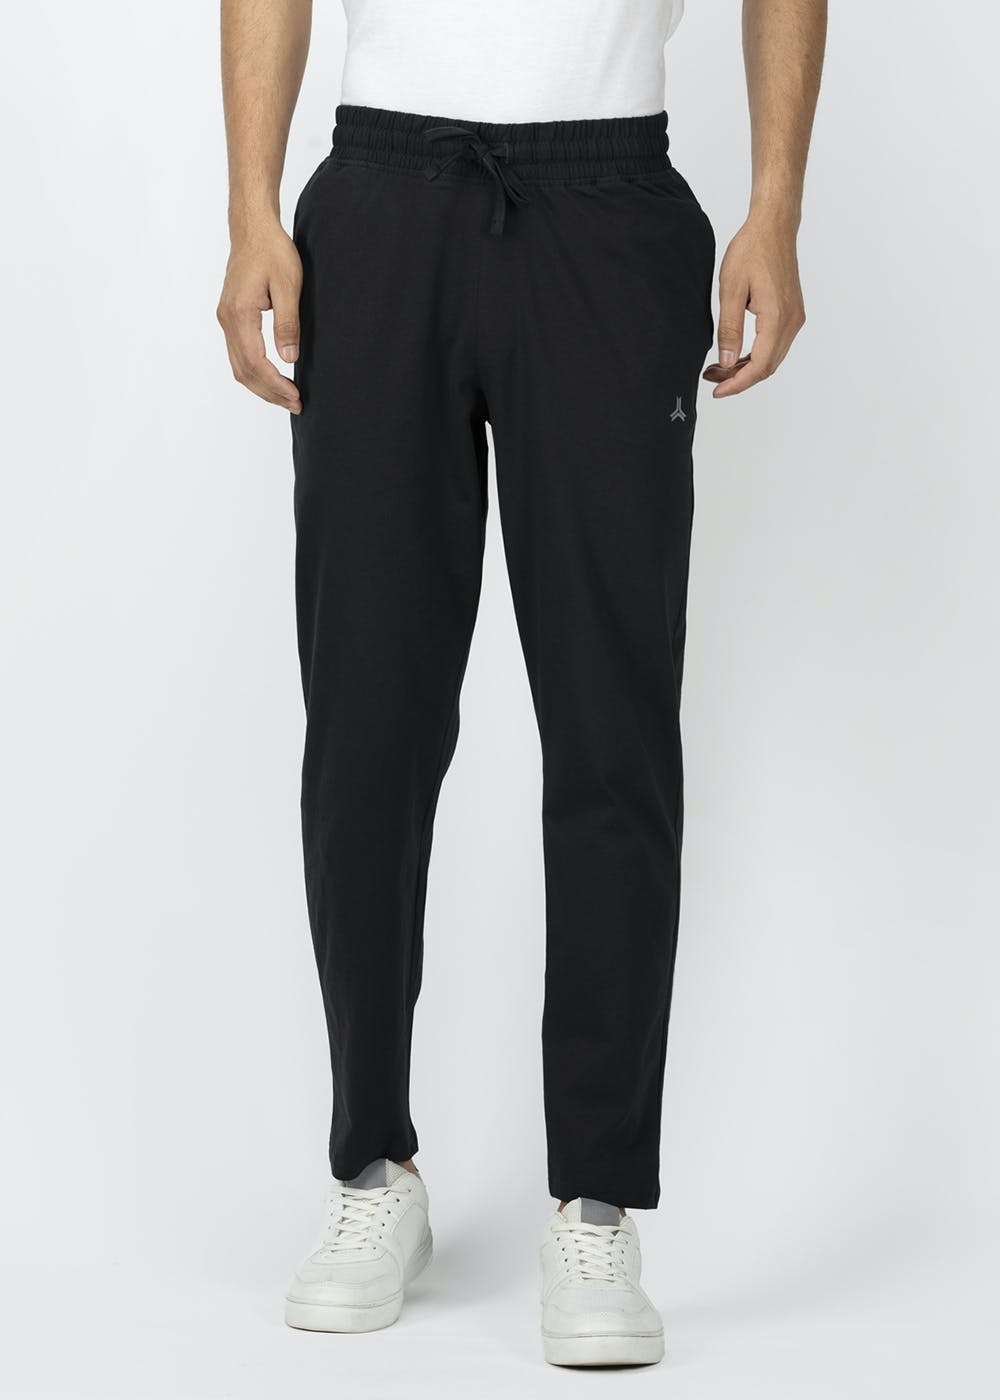 Get Solid Essential Track Pants at ₹ 549 | LBB Shop